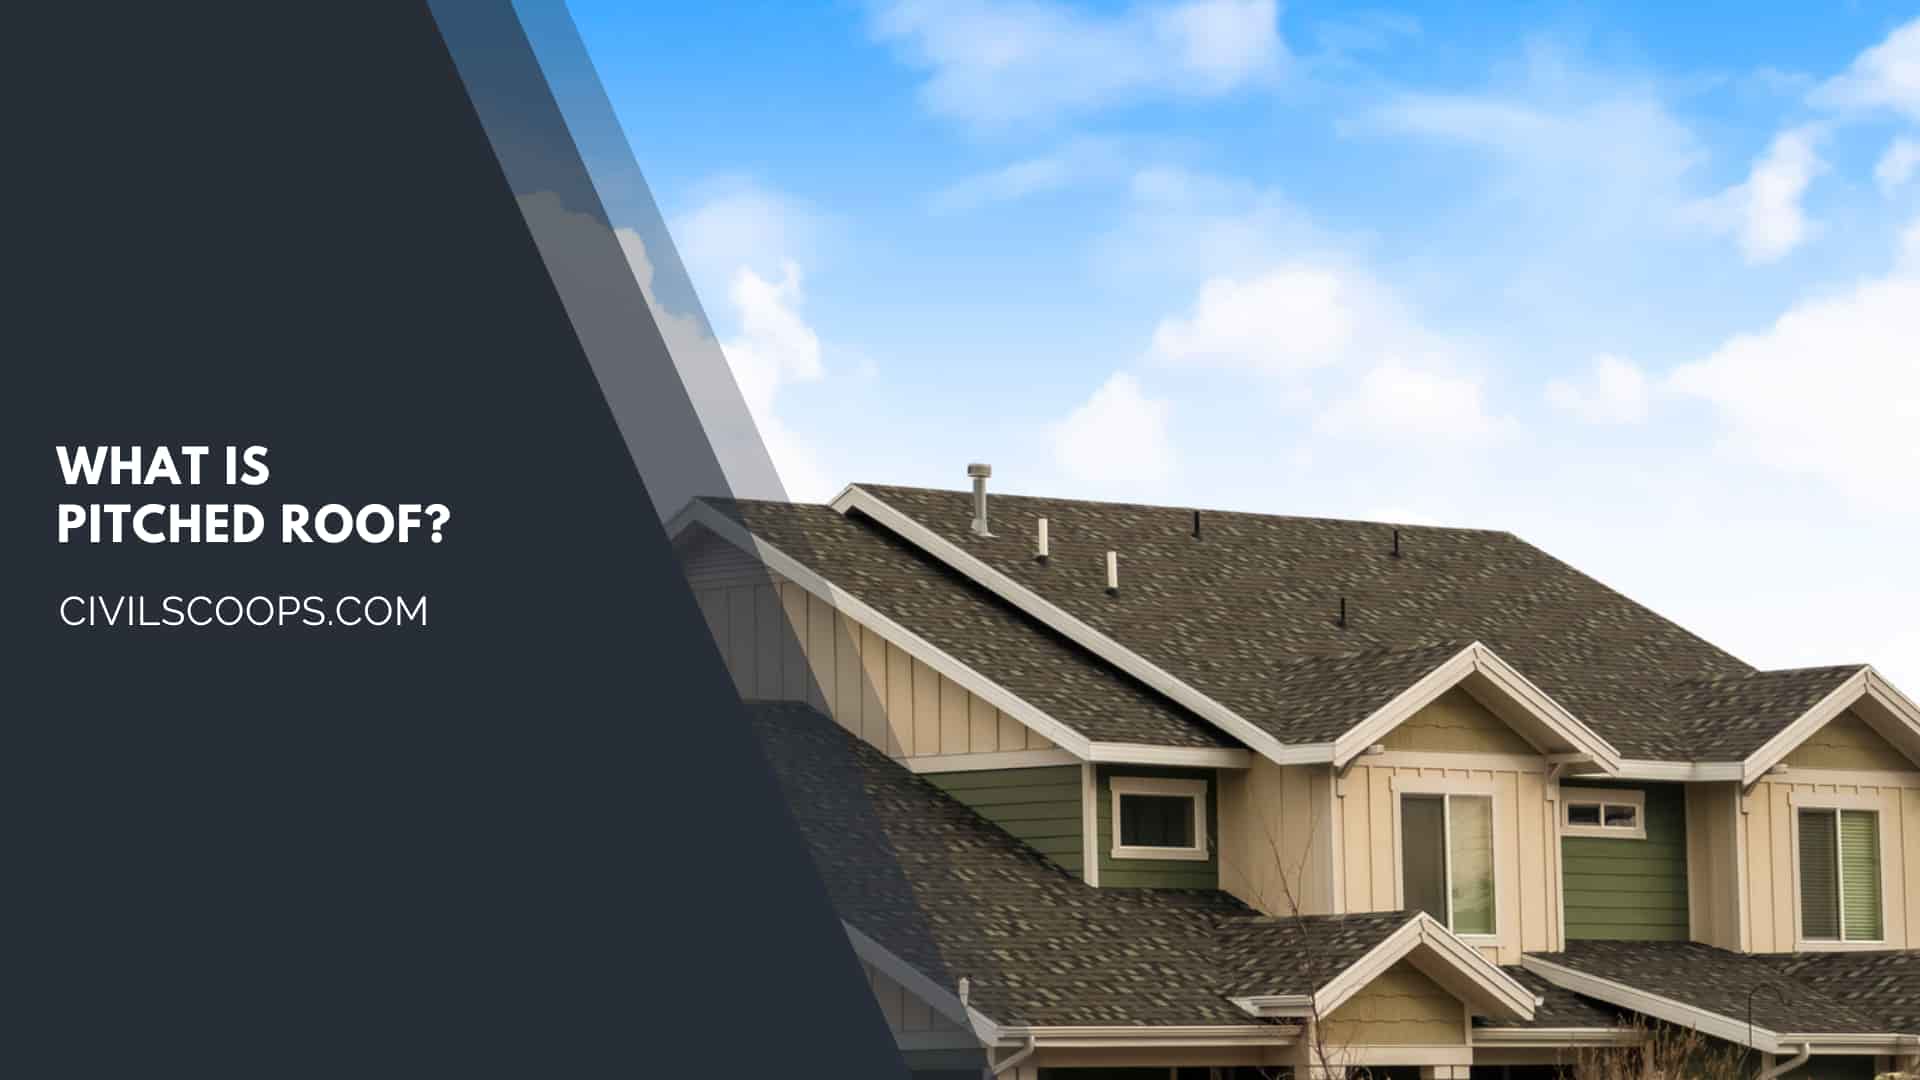 What Is Pitched Roof?